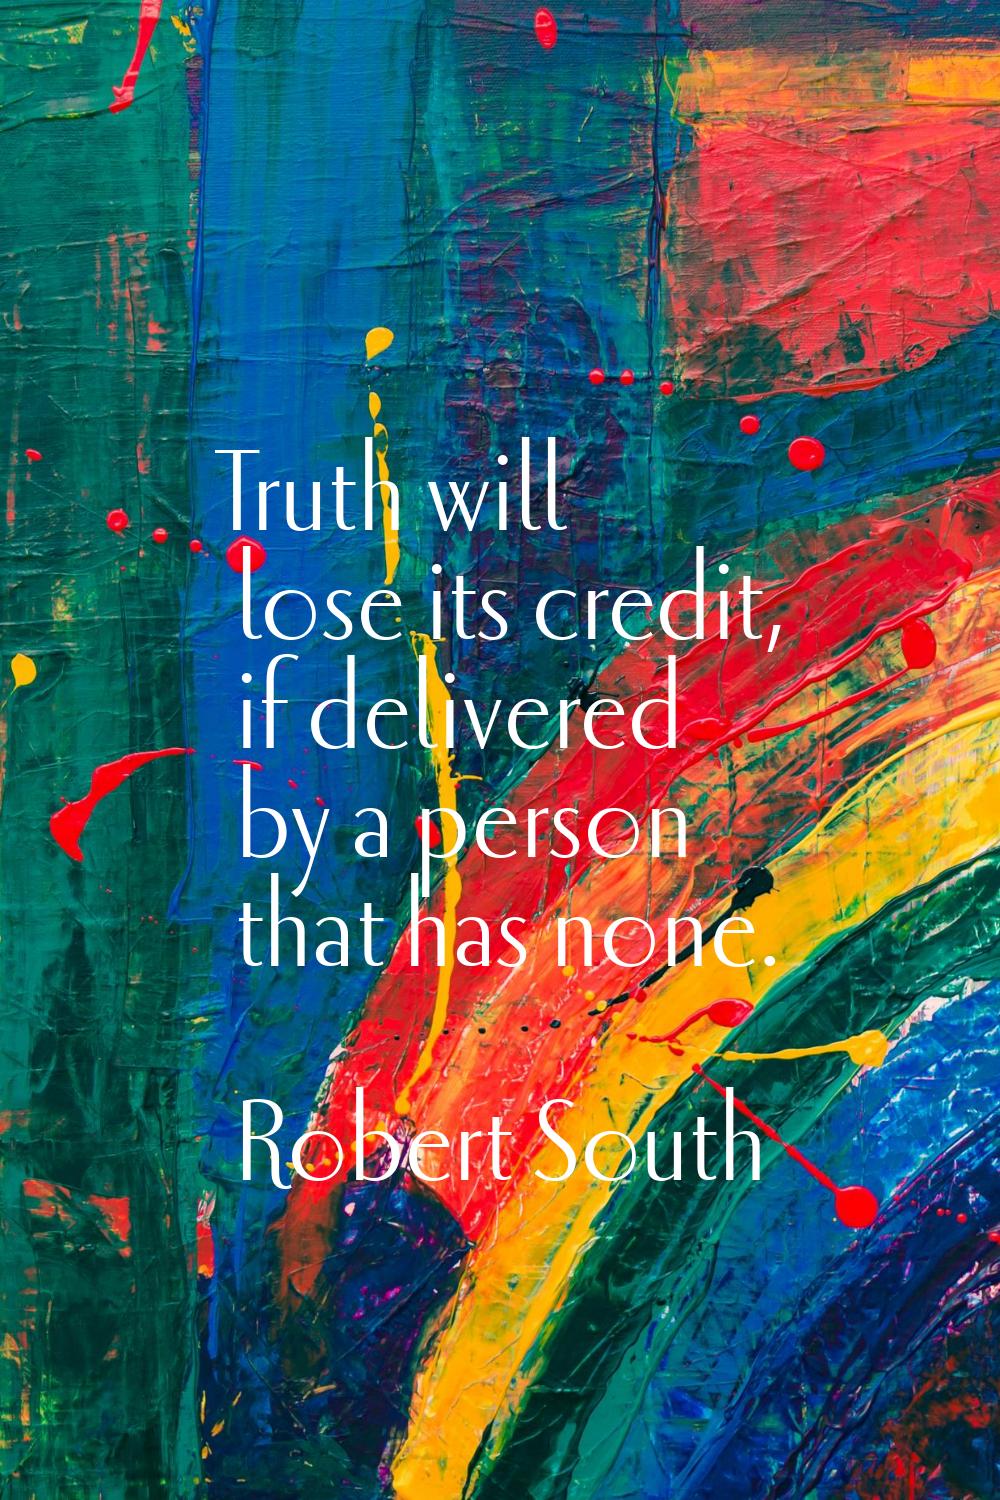 Truth will lose its credit, if delivered by a person that has none.